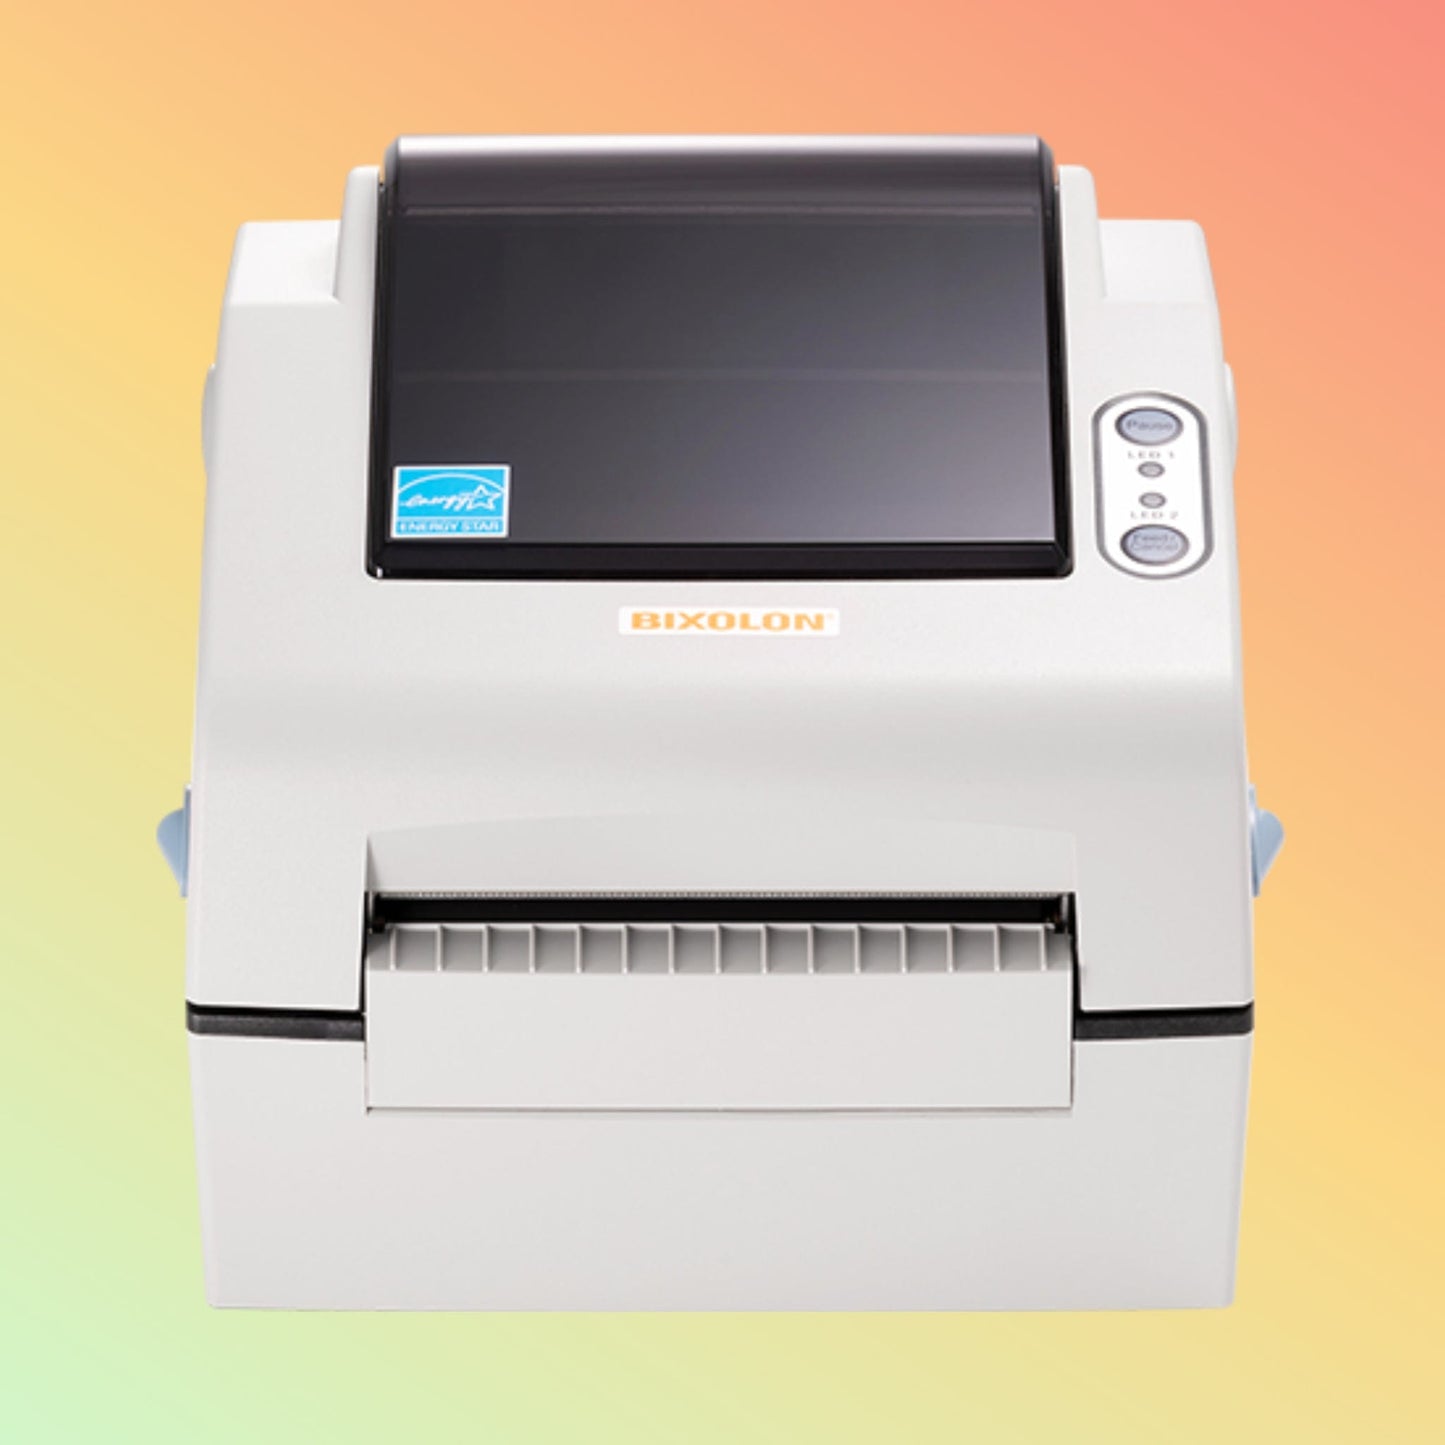 "User-friendly Bixolon SLP-D420 DG with optional auto-cutter, enhancing productivity in high-volume printing environments."